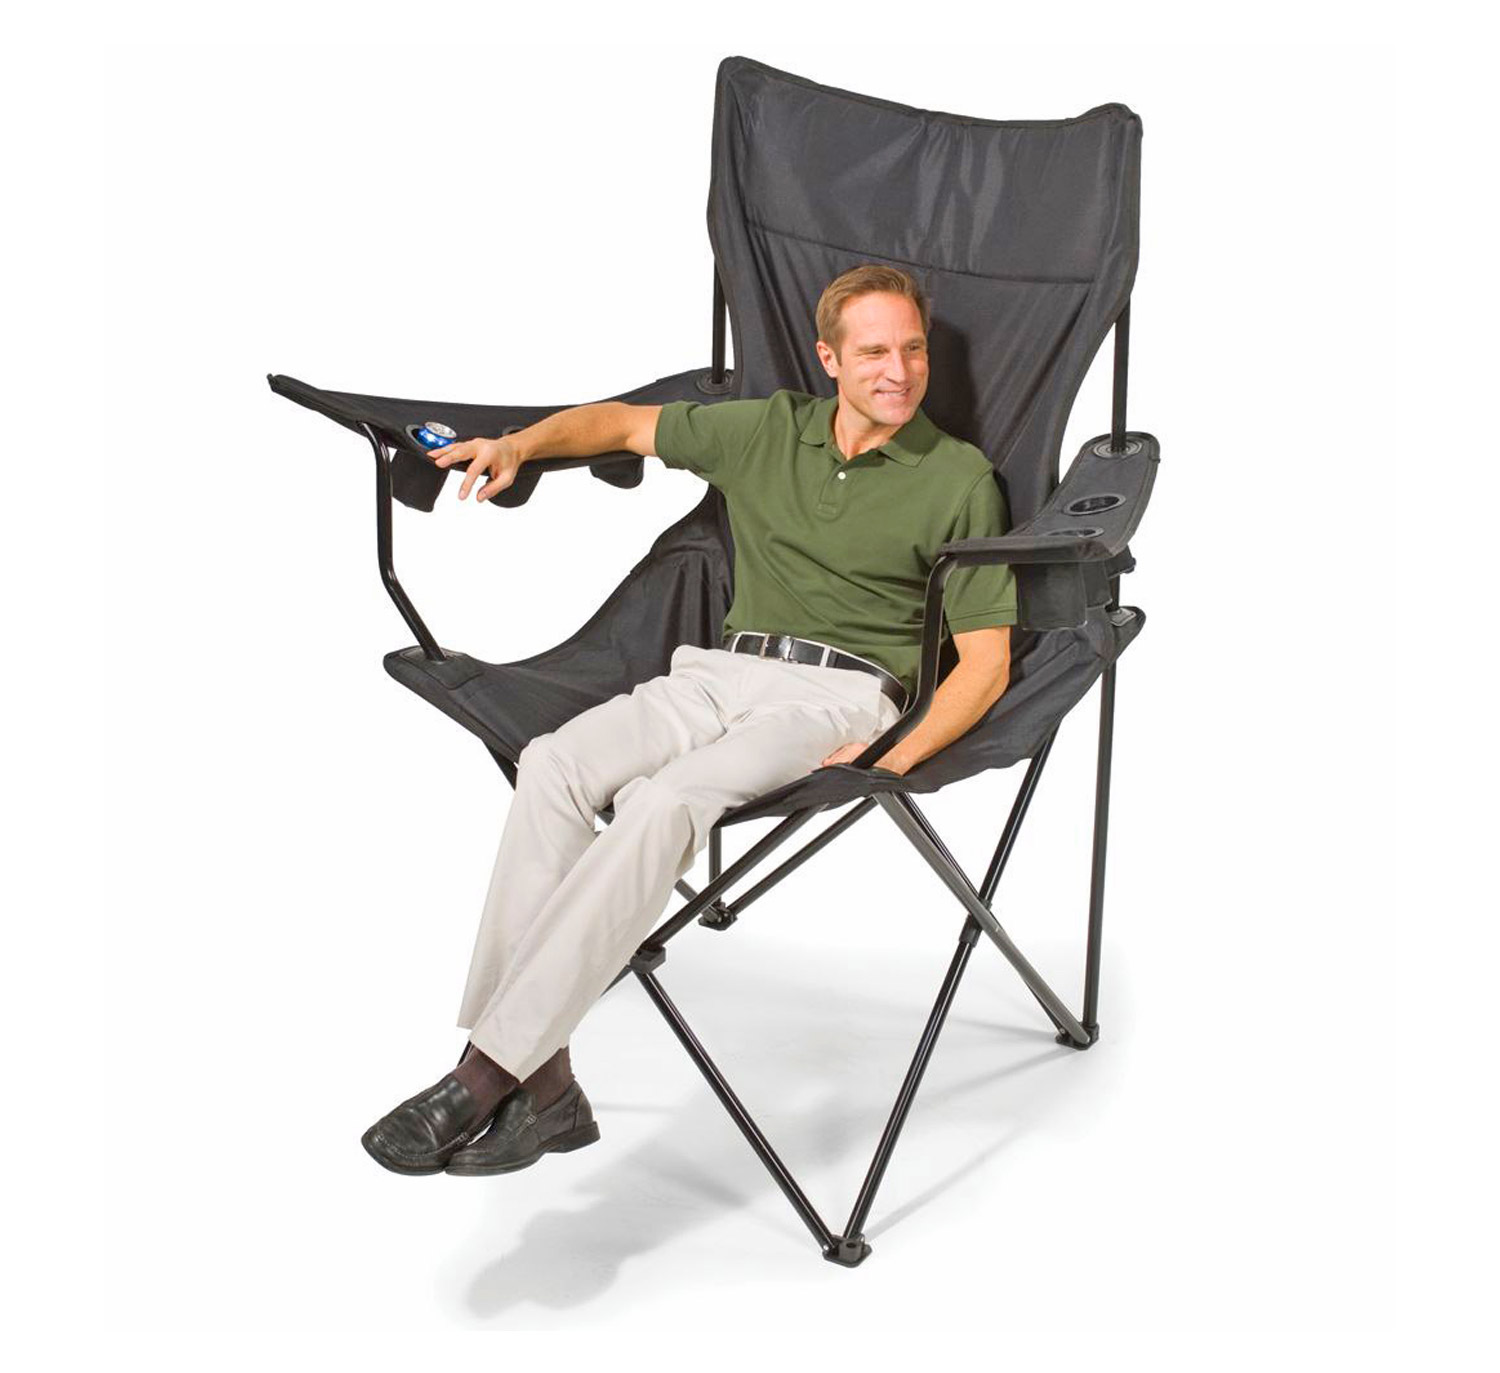 You Can Get A Giant Folding Chair That Has 6 Cup Holders